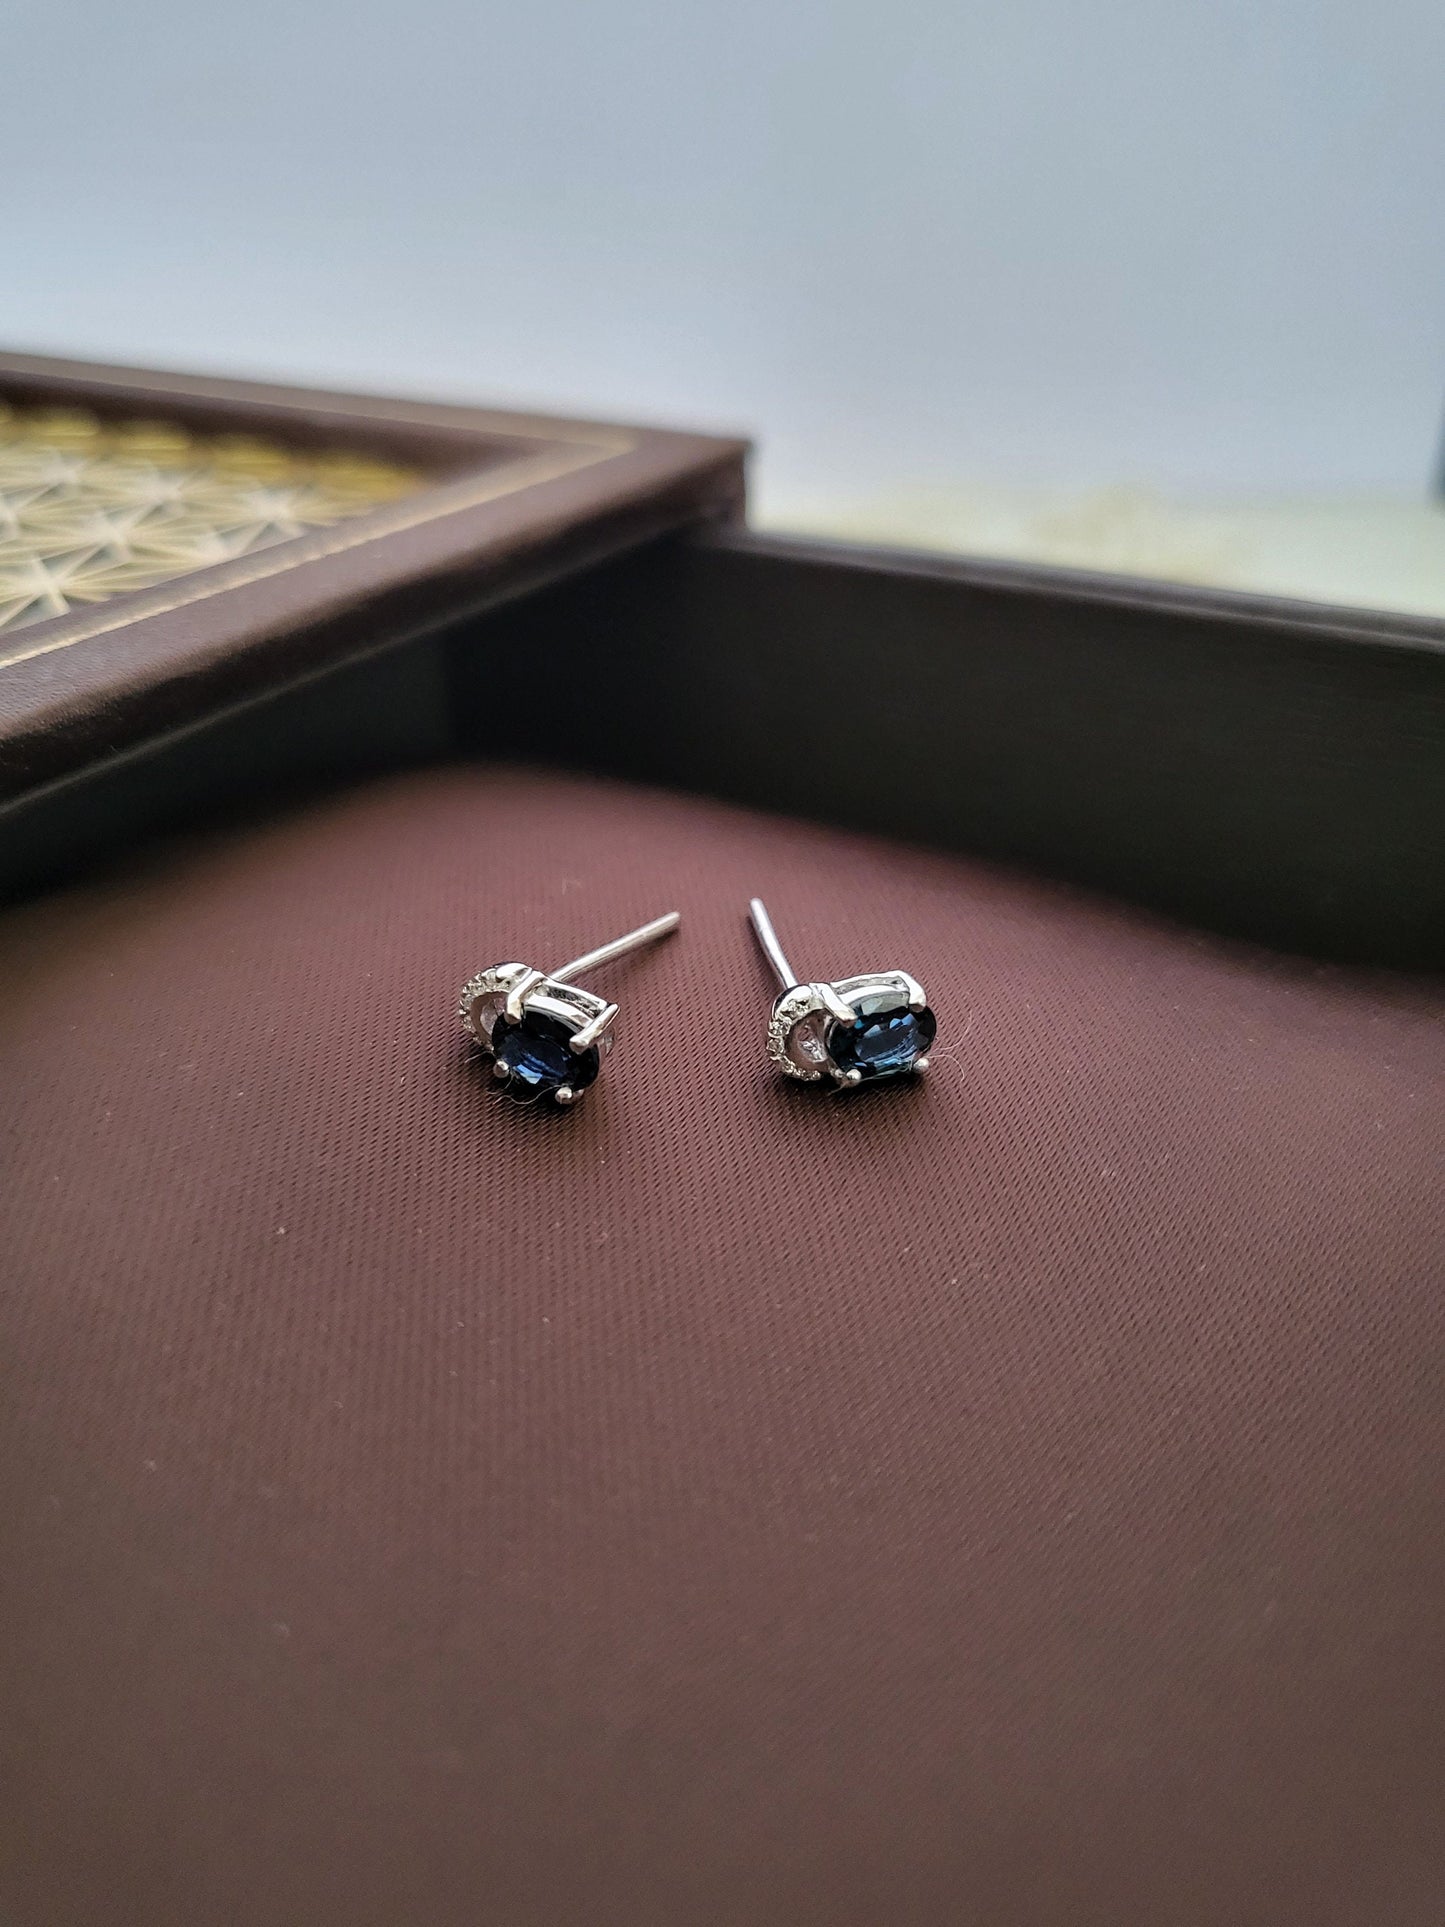 Natural Blue Sapphire Rare Gemstone Earrings with Cubic Zirconia Stud Silver Earrings